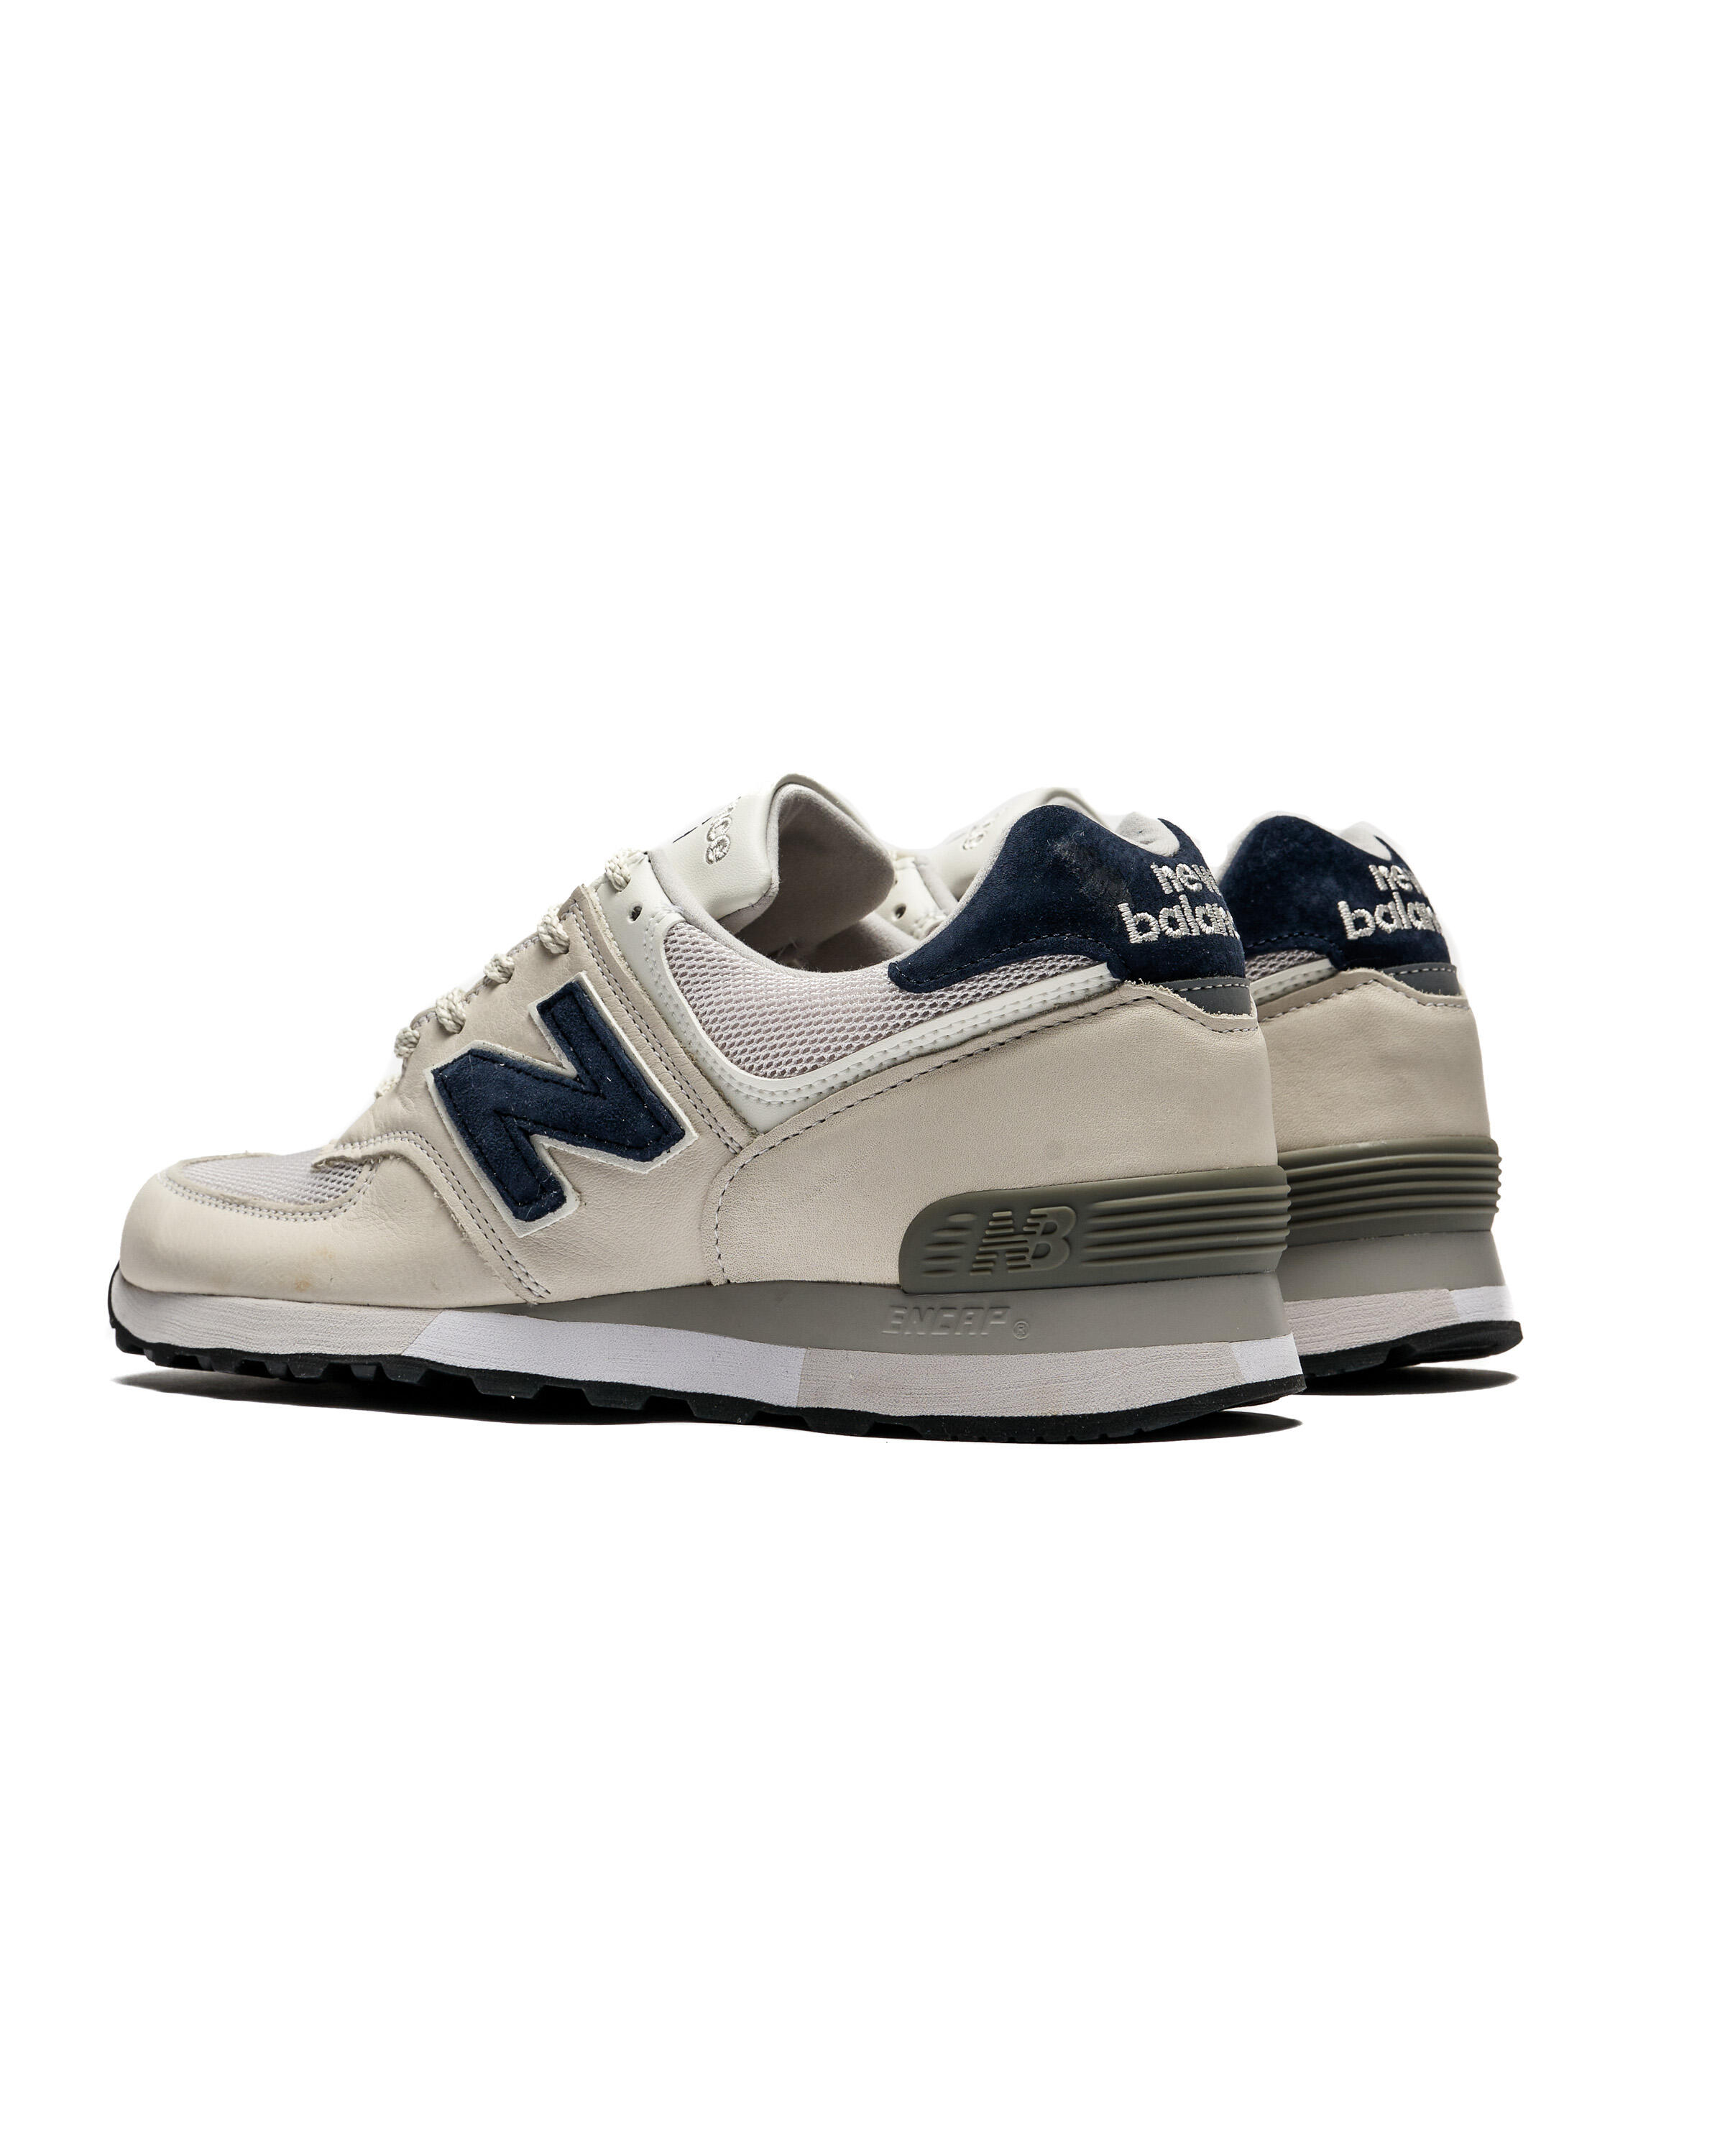 New Balance OU 576 LWG - Made in England